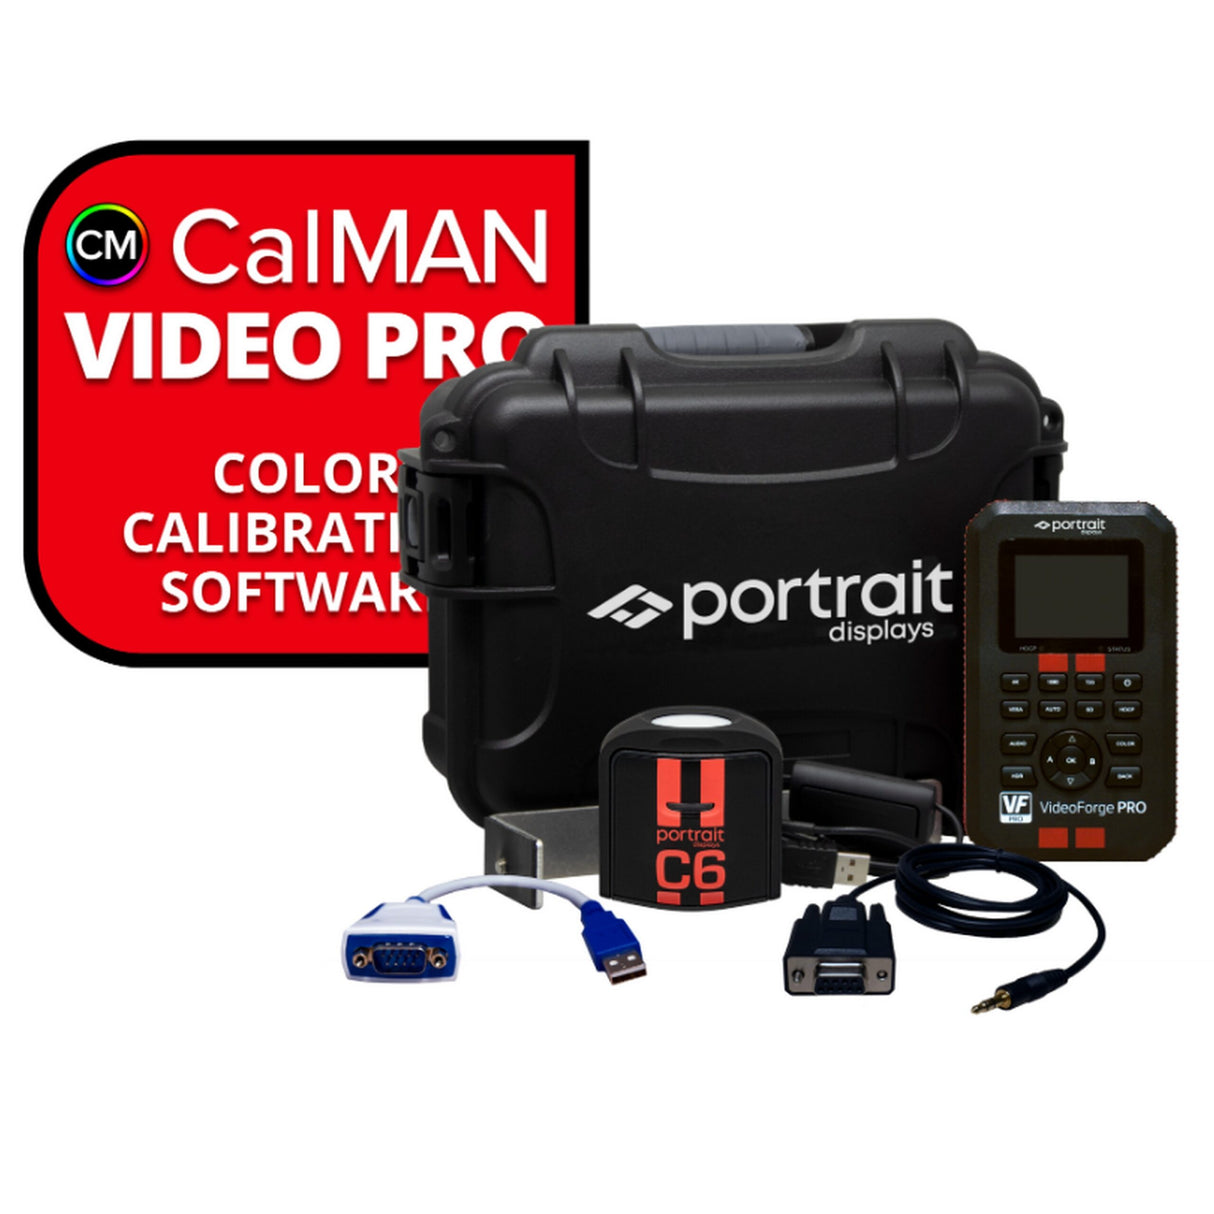 SpectraCal CalMAN Video Professional AutoCal Bundle with C6 HDR2000 and VideoForge Pro